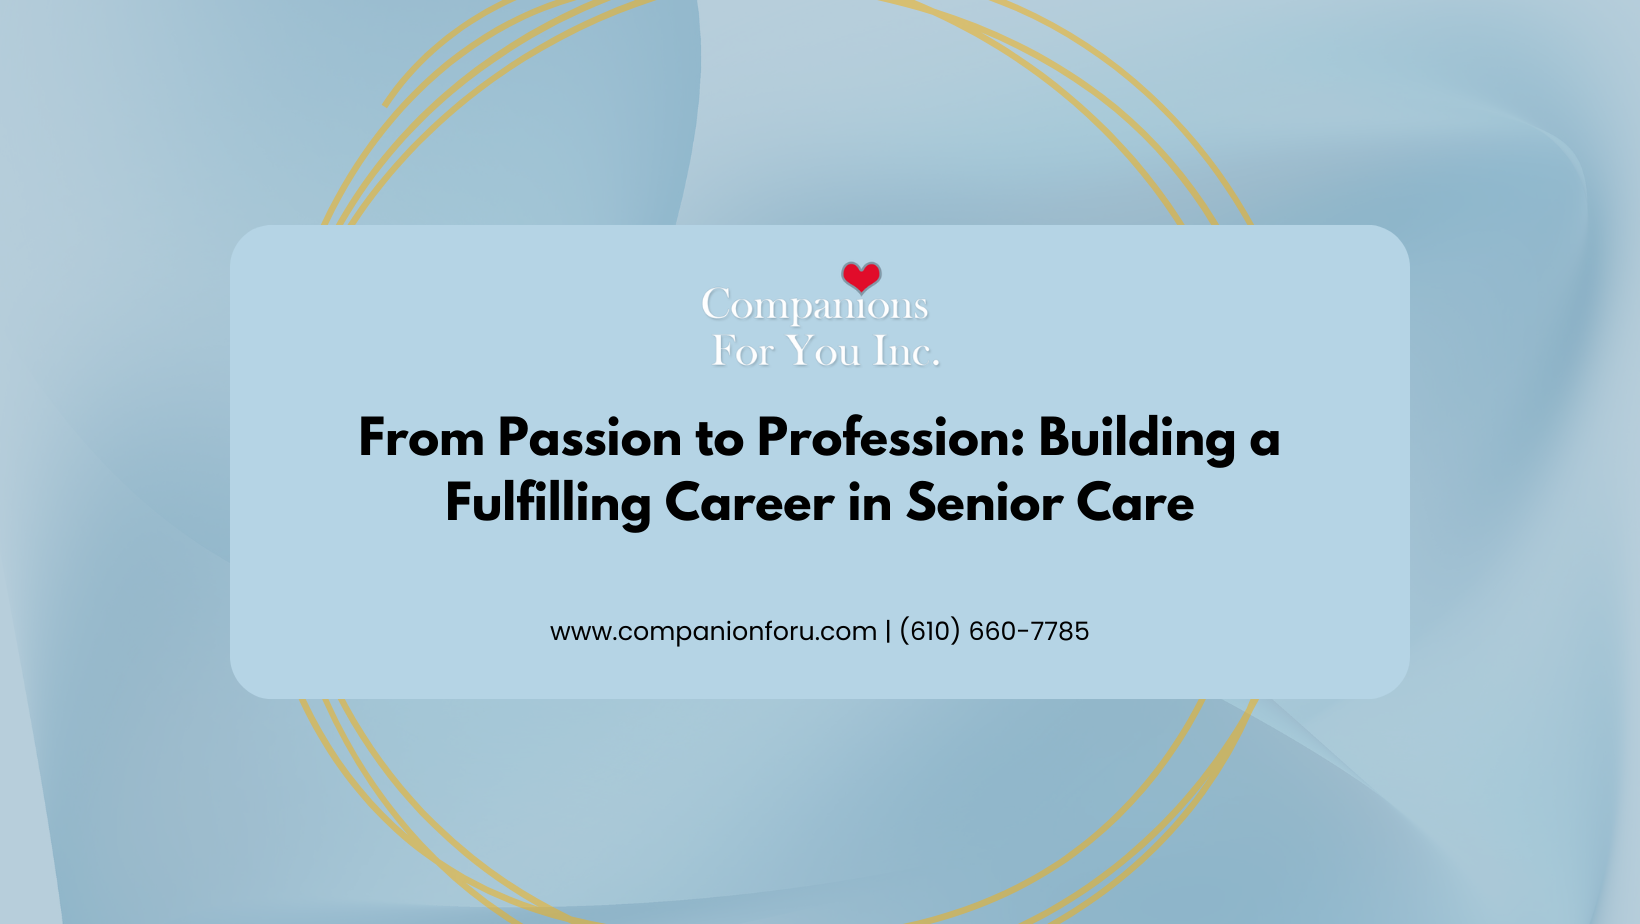 From Passion to Profession: Building a Fulfilling Career in Senior Care